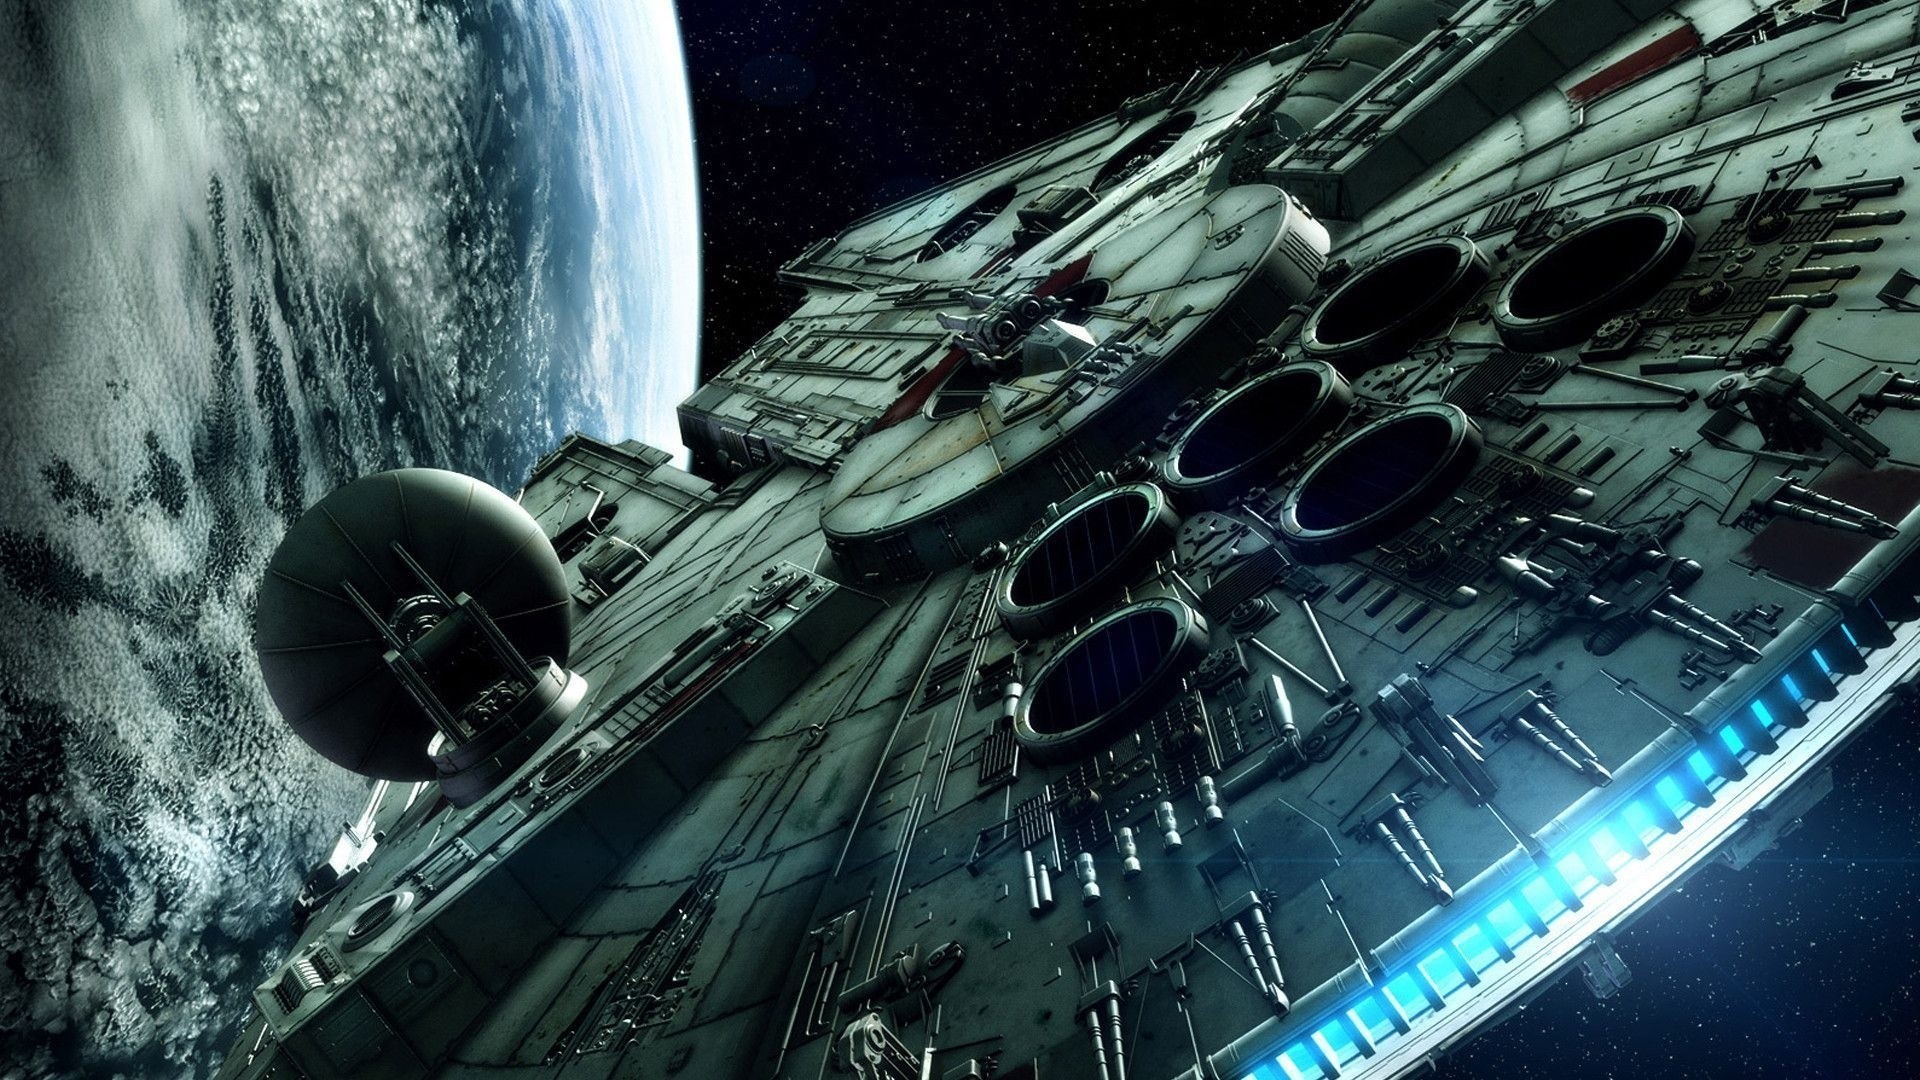 1920x1080 Title : star wars wallpapers p with high definition wallpaper 1920Ã1080.  Dimension : 1920 x 1080. File Type : JPG/JPEG